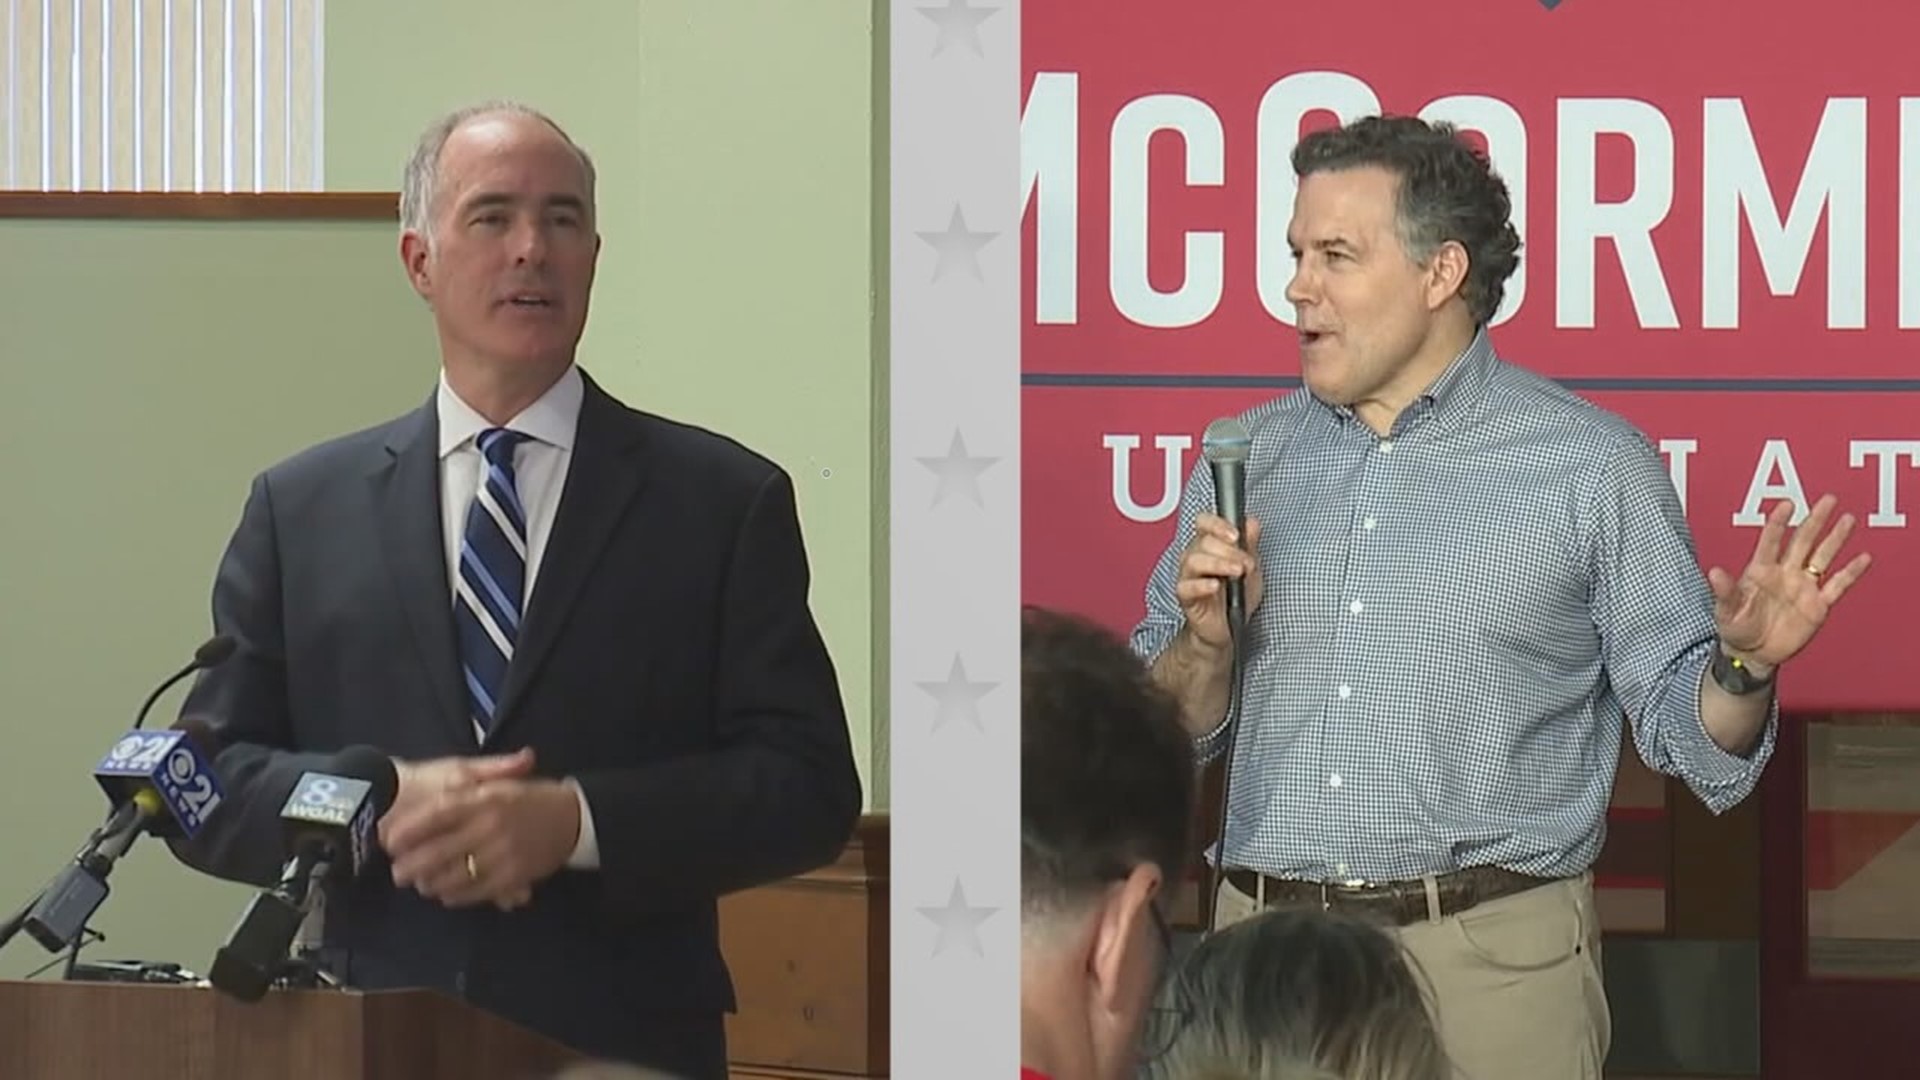 The race for one of Pennsylvania's two seats in the U.S. Senate is shaping up, with two candidates pushing to the forefront.